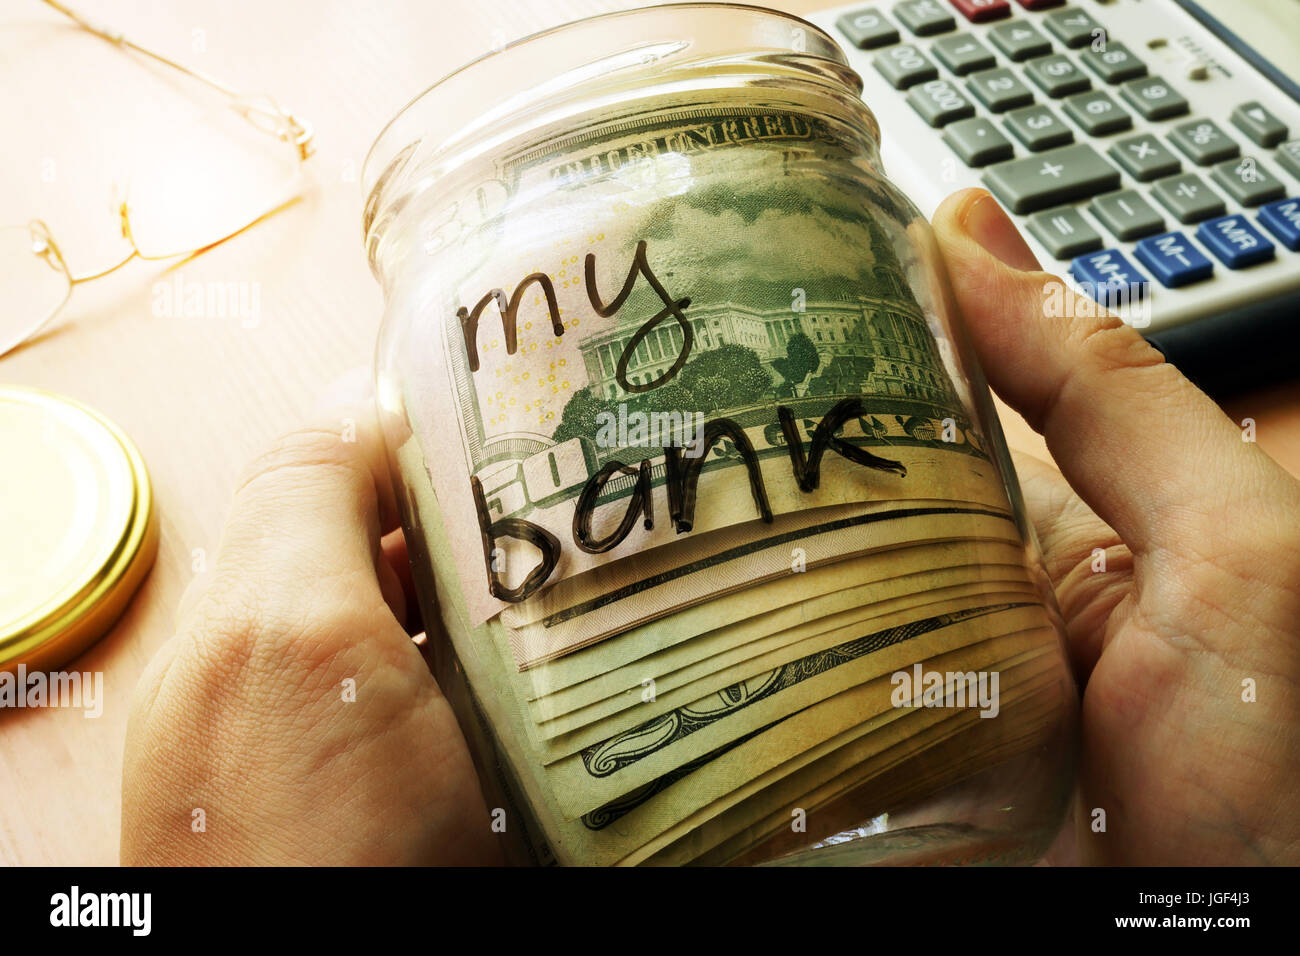 Jar with dollars and sign my bank on a side. Home finances and savings concept. Stock Photo